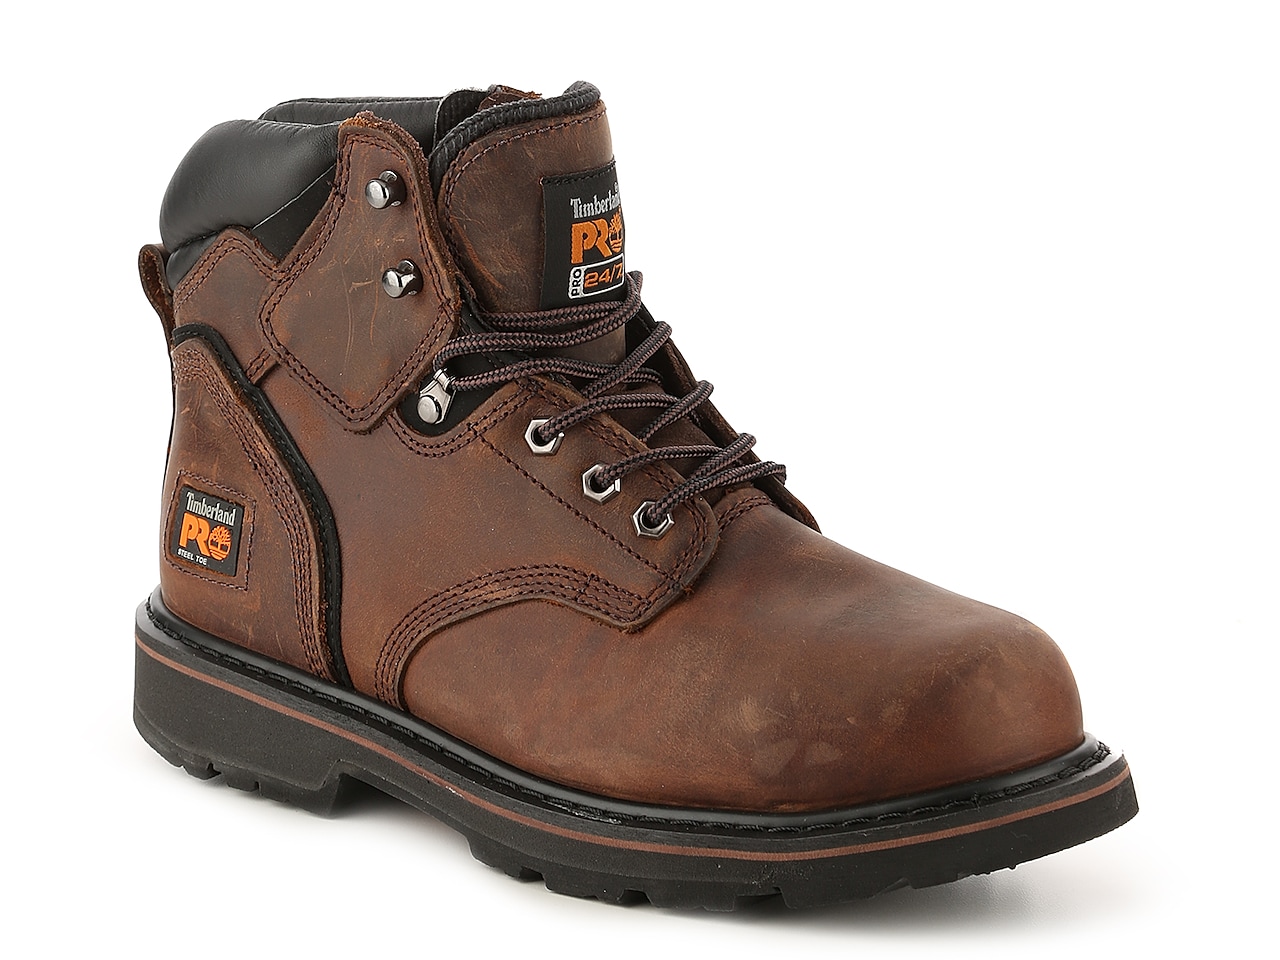 Timberland PRO Pit Boss Steel Toe Work Boot Men's Shoes | DSW